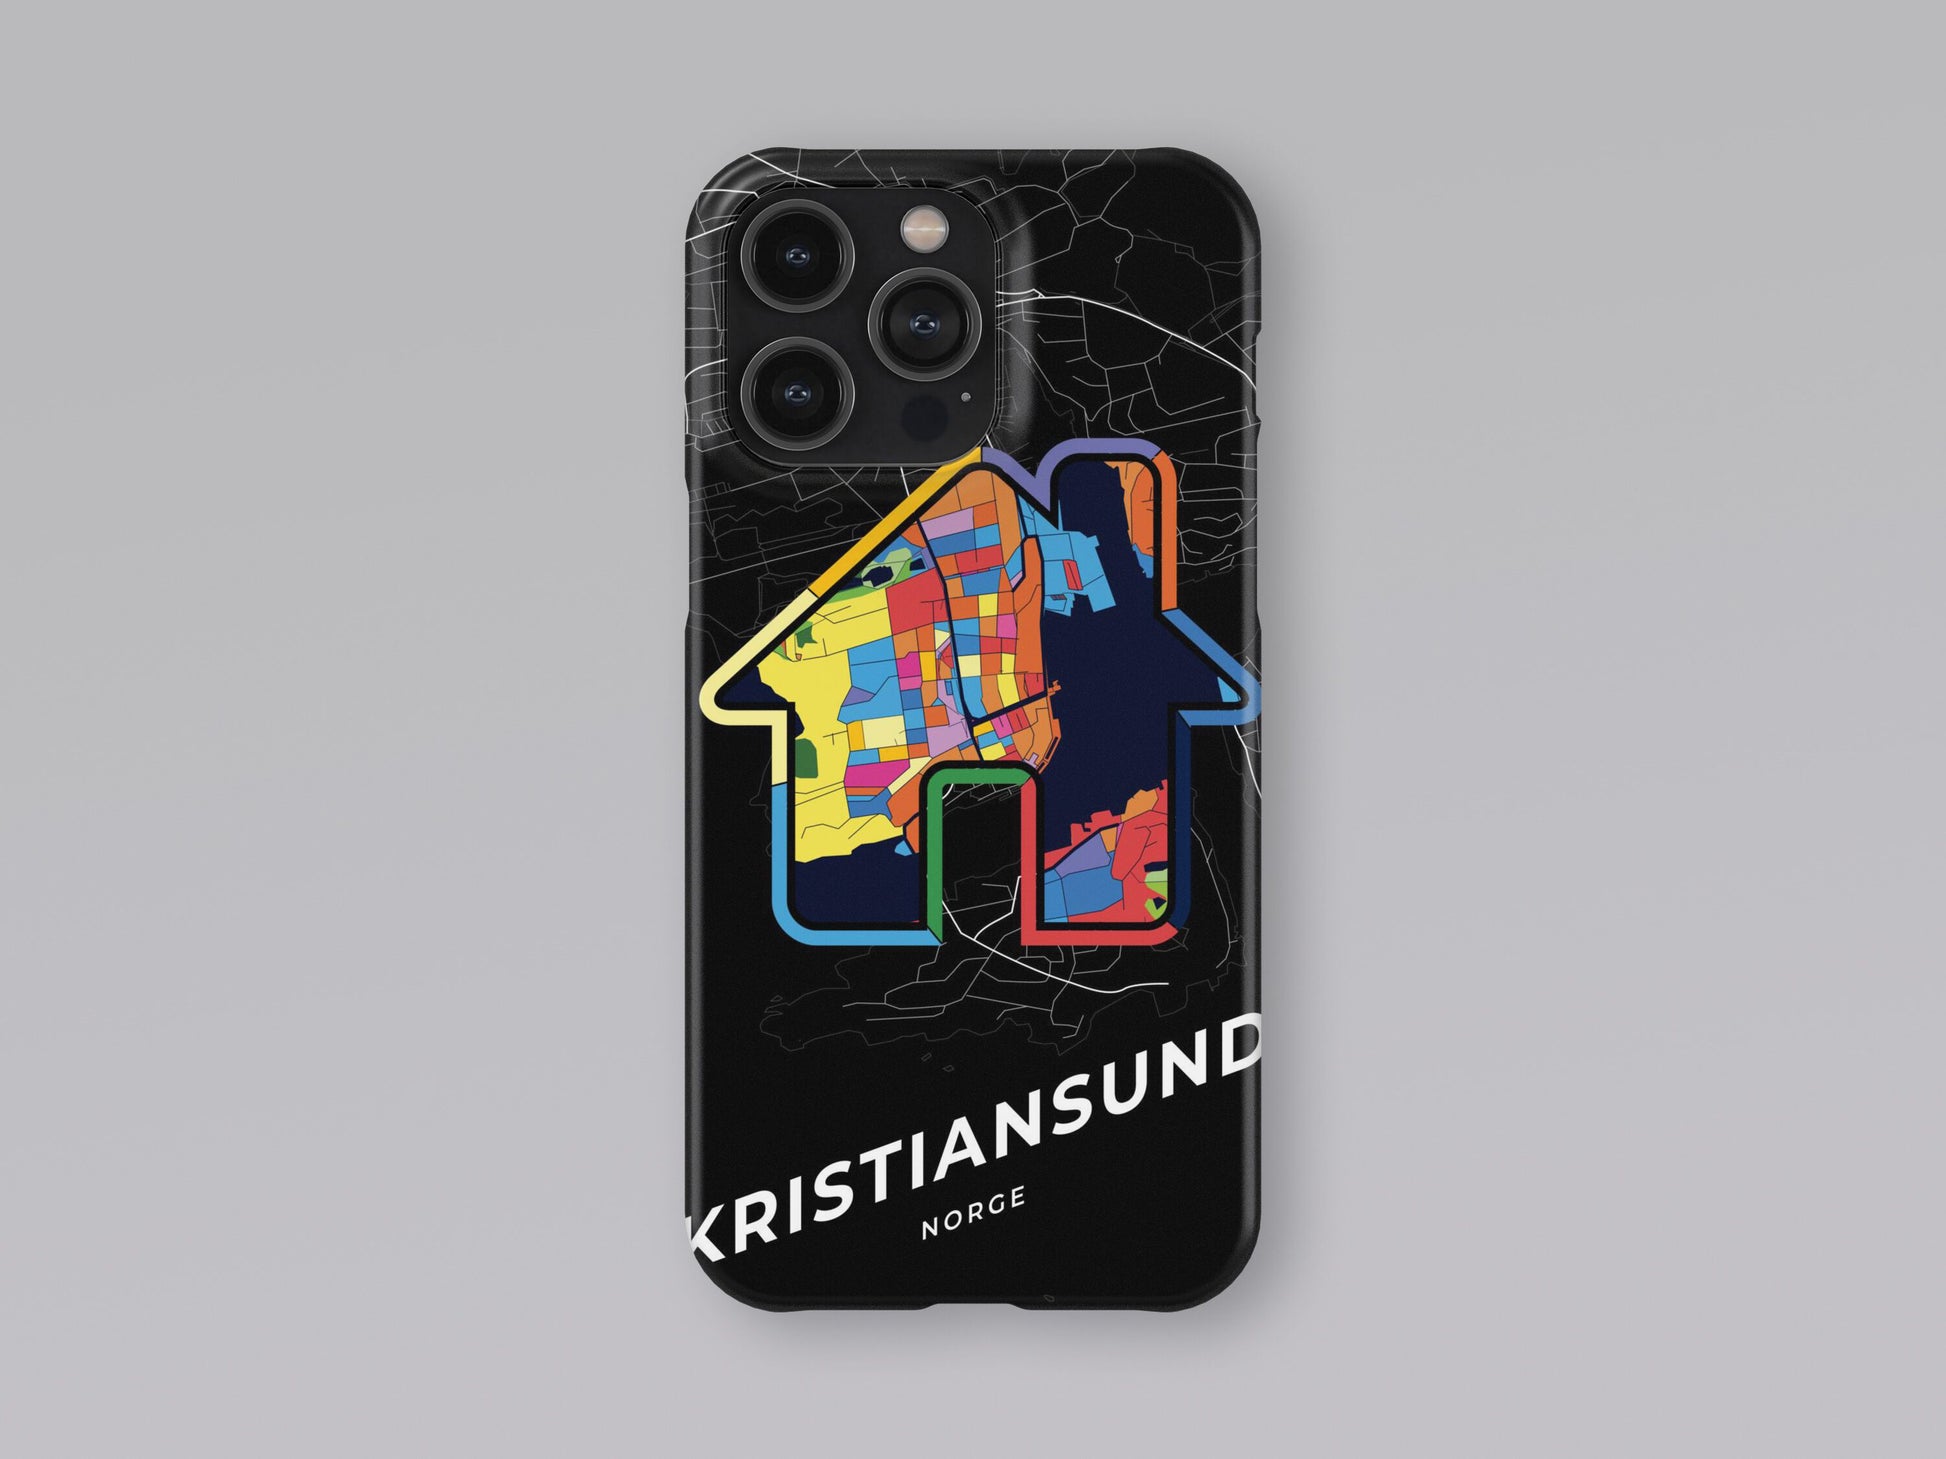 Kristiansund Norway slim phone case with colorful icon. Birthday, wedding or housewarming gift. Couple match cases. 3